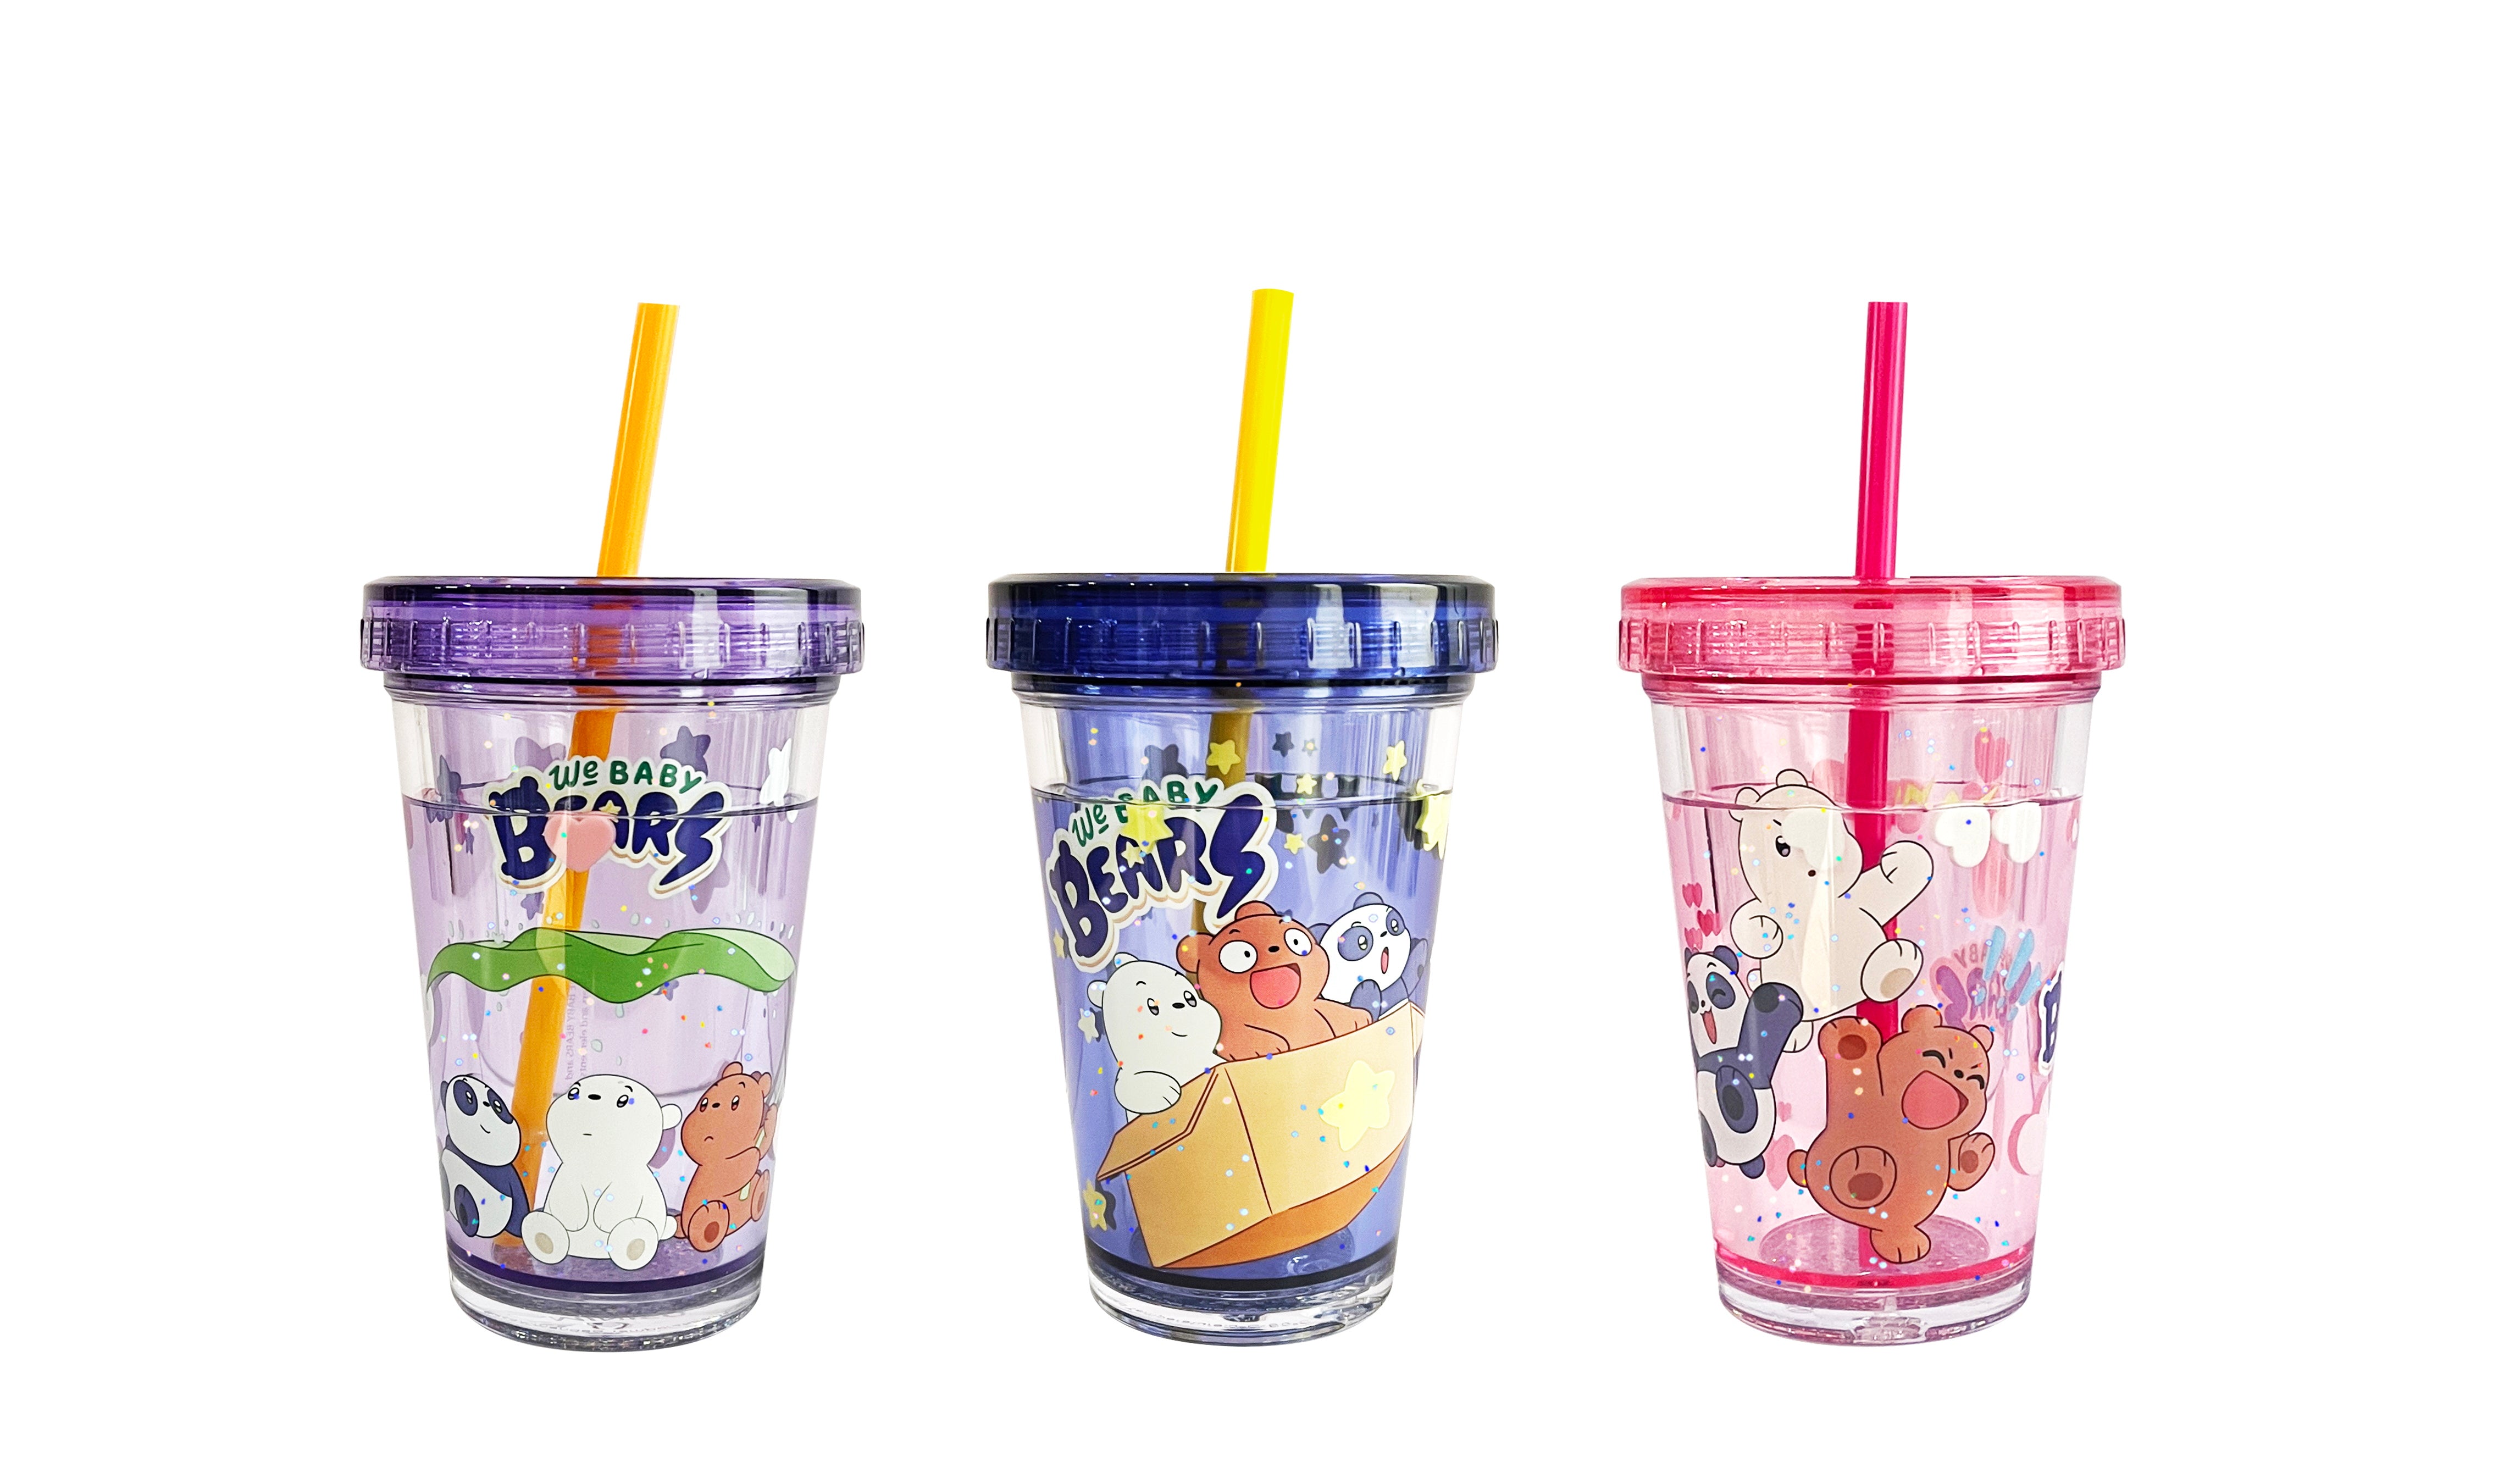 MINISO WE BABY BEARS COLLECTION DOUBLE WALL PLASTIC TUMBLER (320ML) 2014798110108 PLASTIC WATER BOTTLE